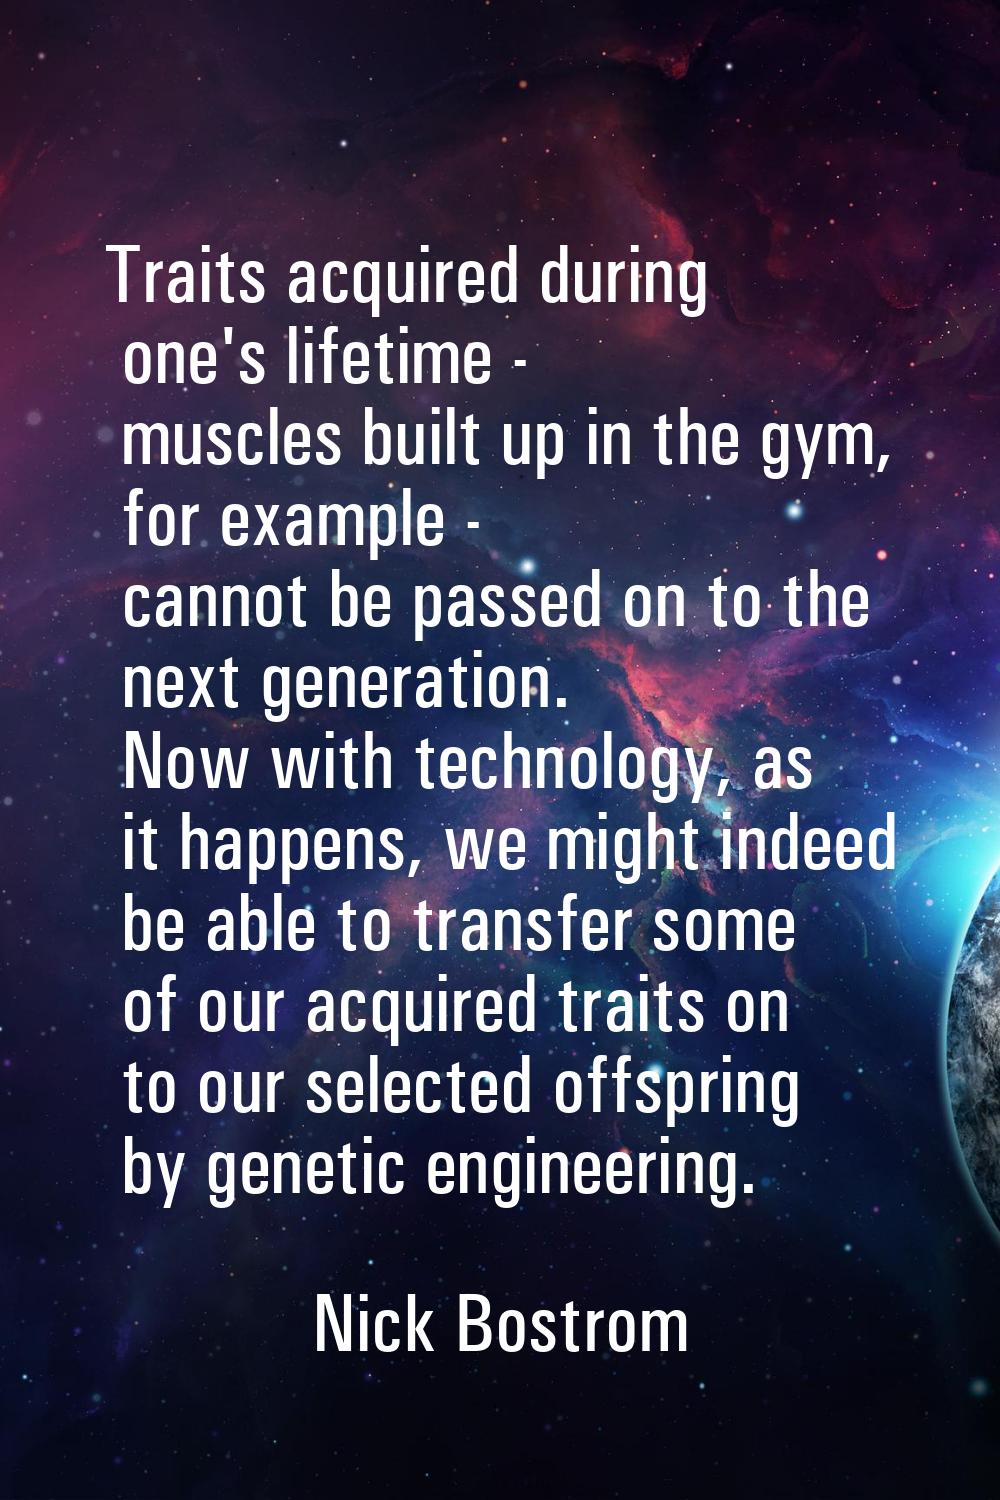 Traits acquired during one's lifetime - muscles built up in the gym, for example - cannot be passed